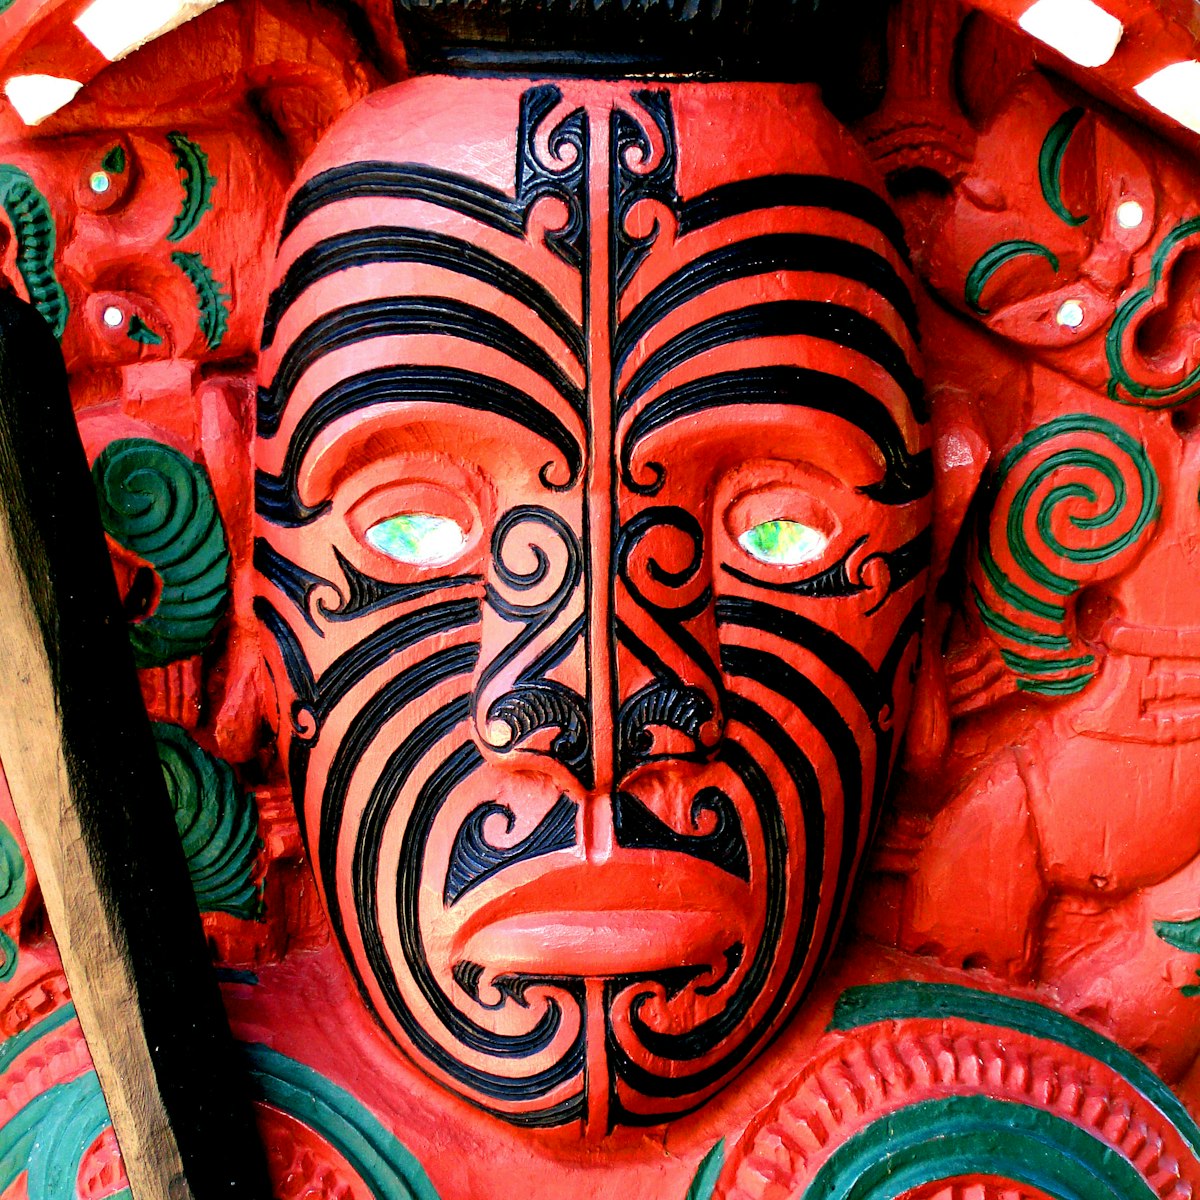 Red carving of a Maori Warrior.
26083891
polynesian, cultural, waitangi, warrior, zealand, culture, carving, ground, tattoo, native, treaty, paint, maori, male, face, wood, luck, art, new, red